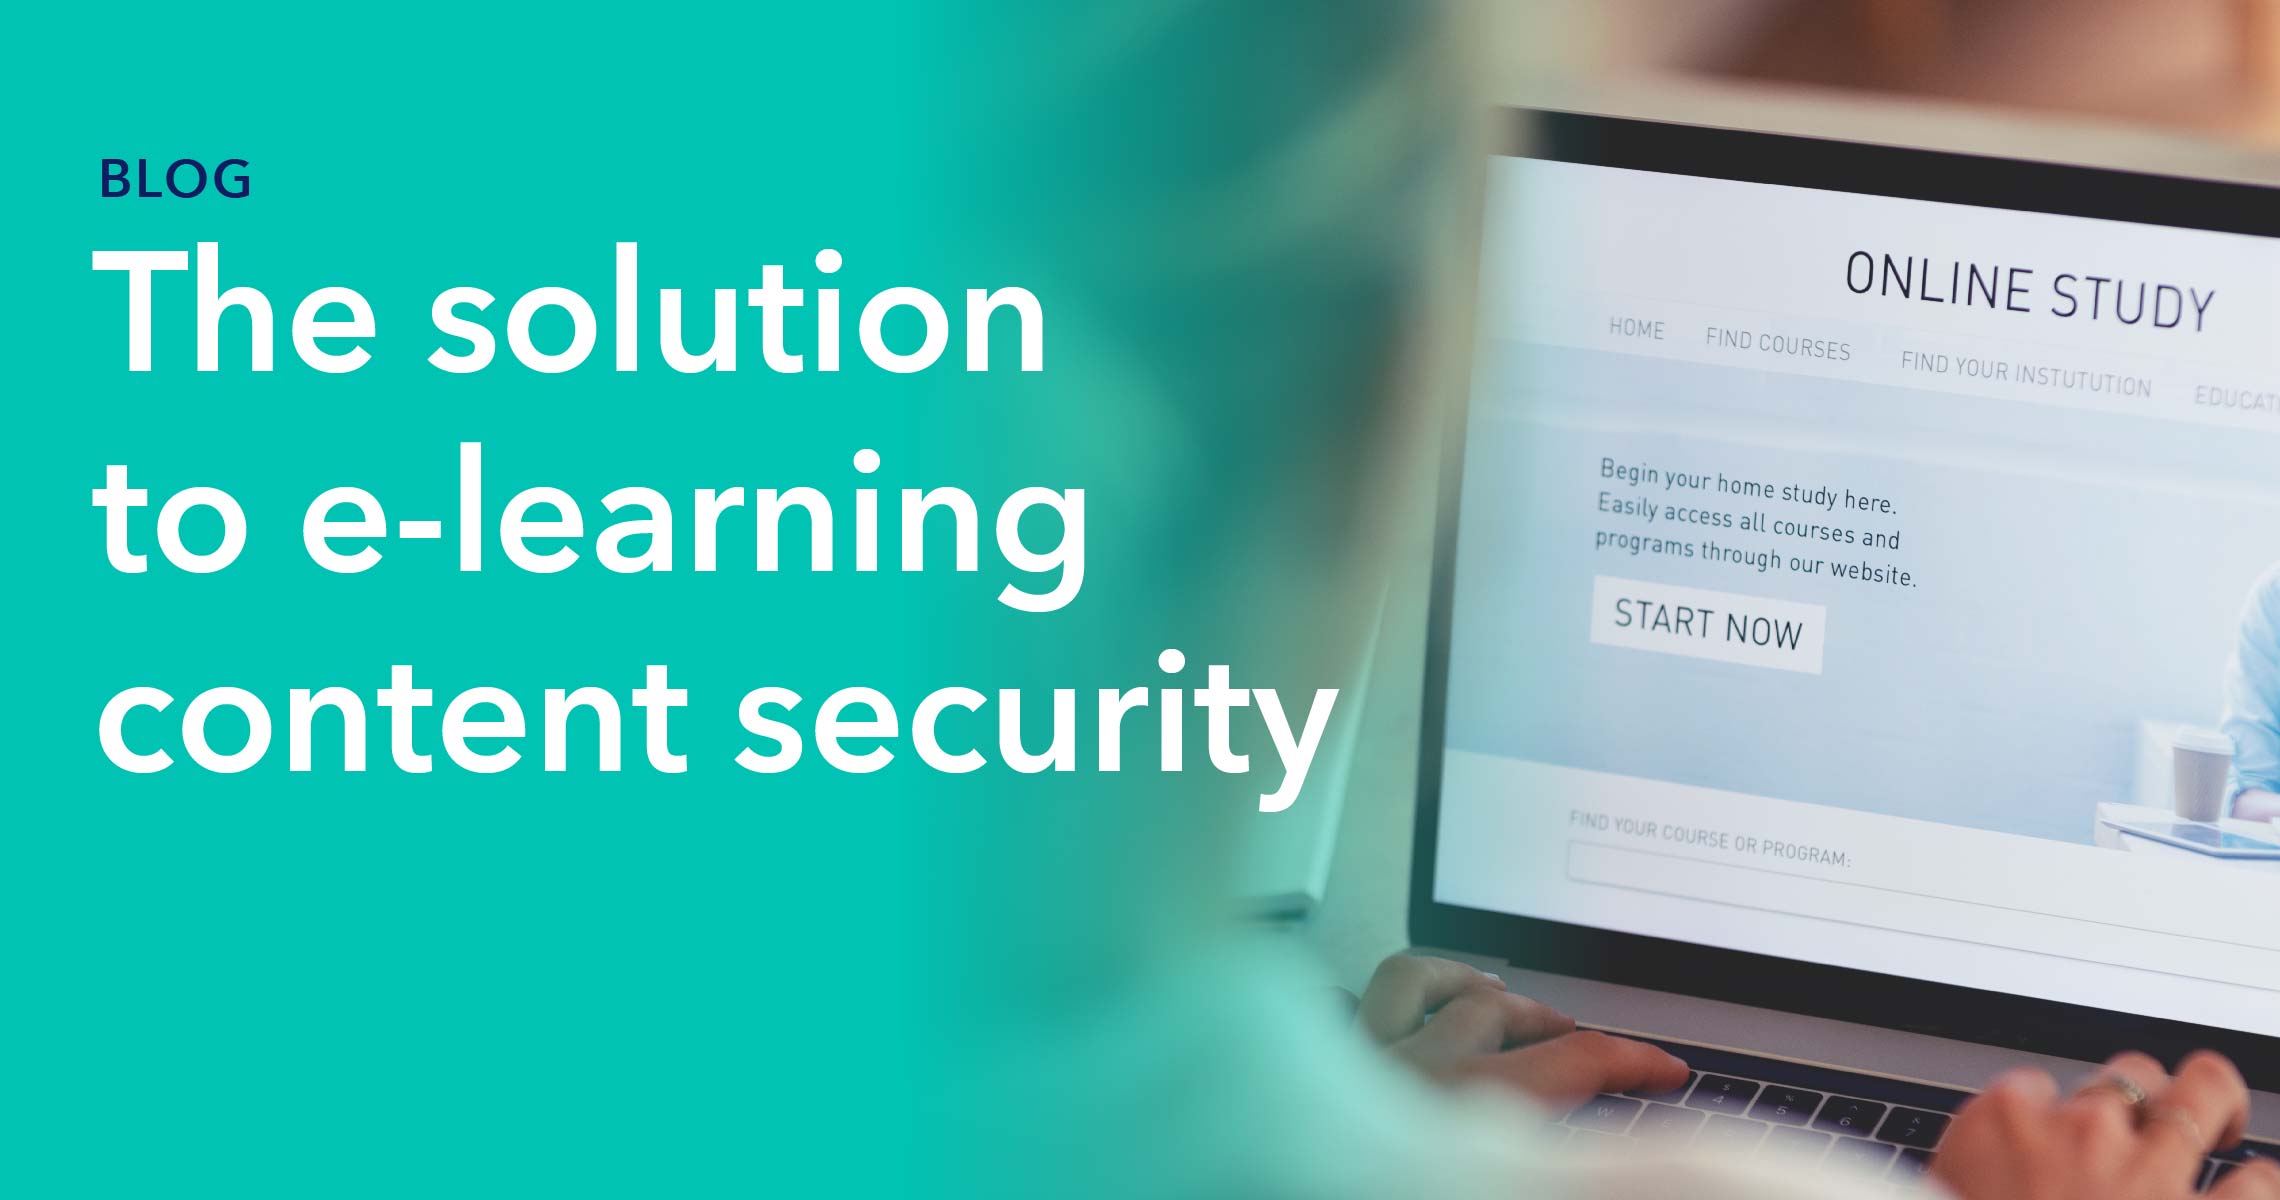 Blog_The solution to e-learning content security